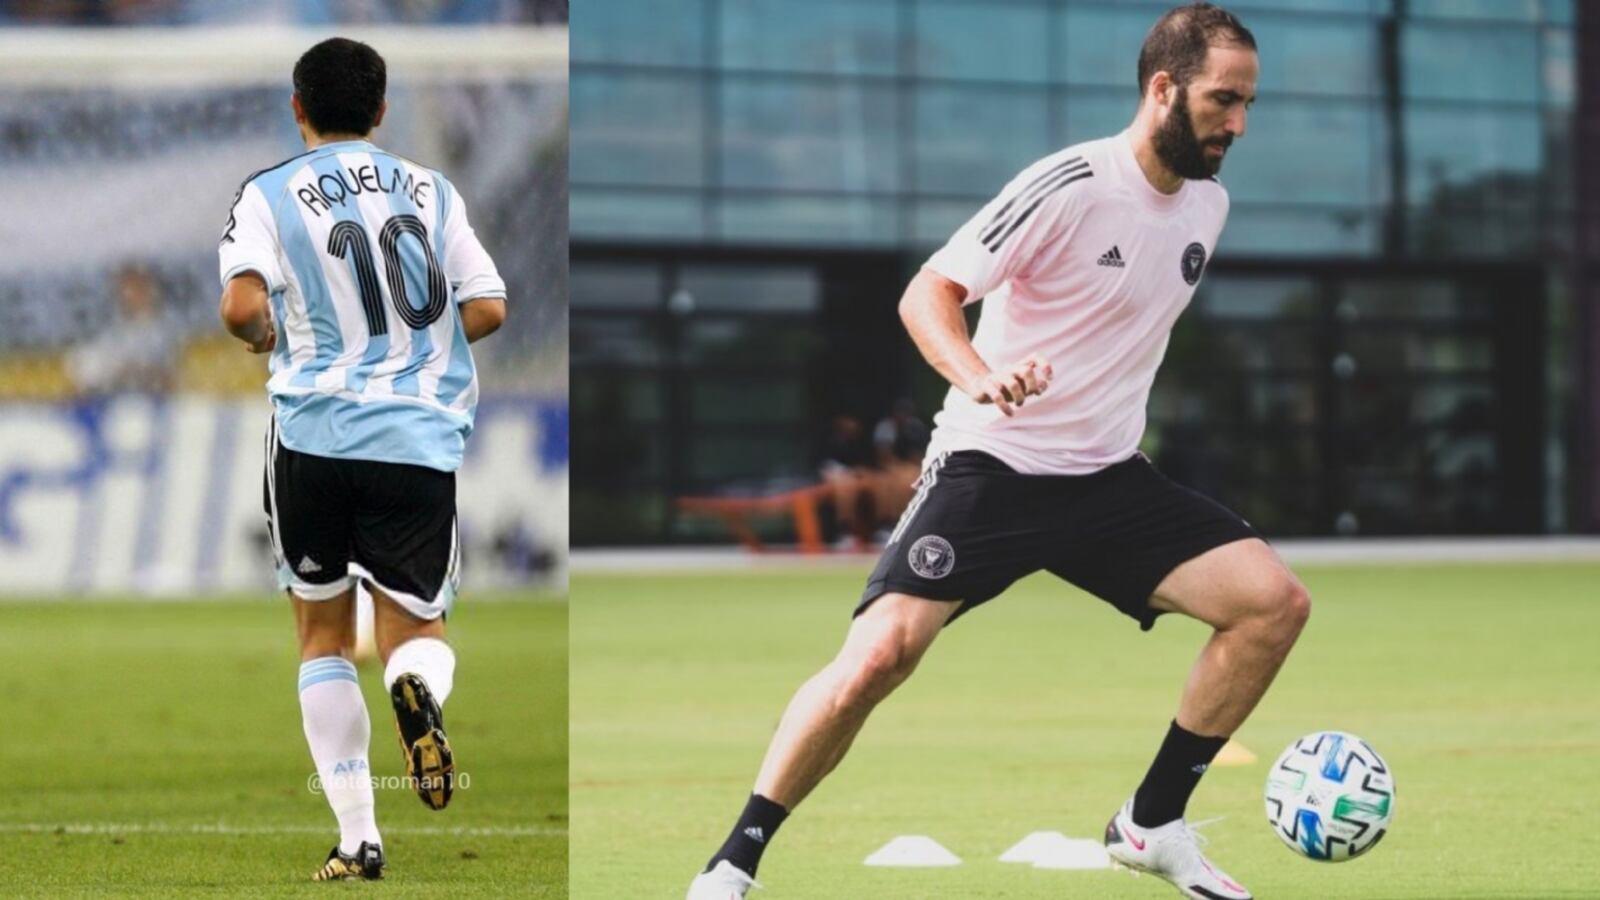 Gonzalo Higuain is Inter Miami's Riquelme? A teammate explained the reasons for the lack of a goal and what their role is.